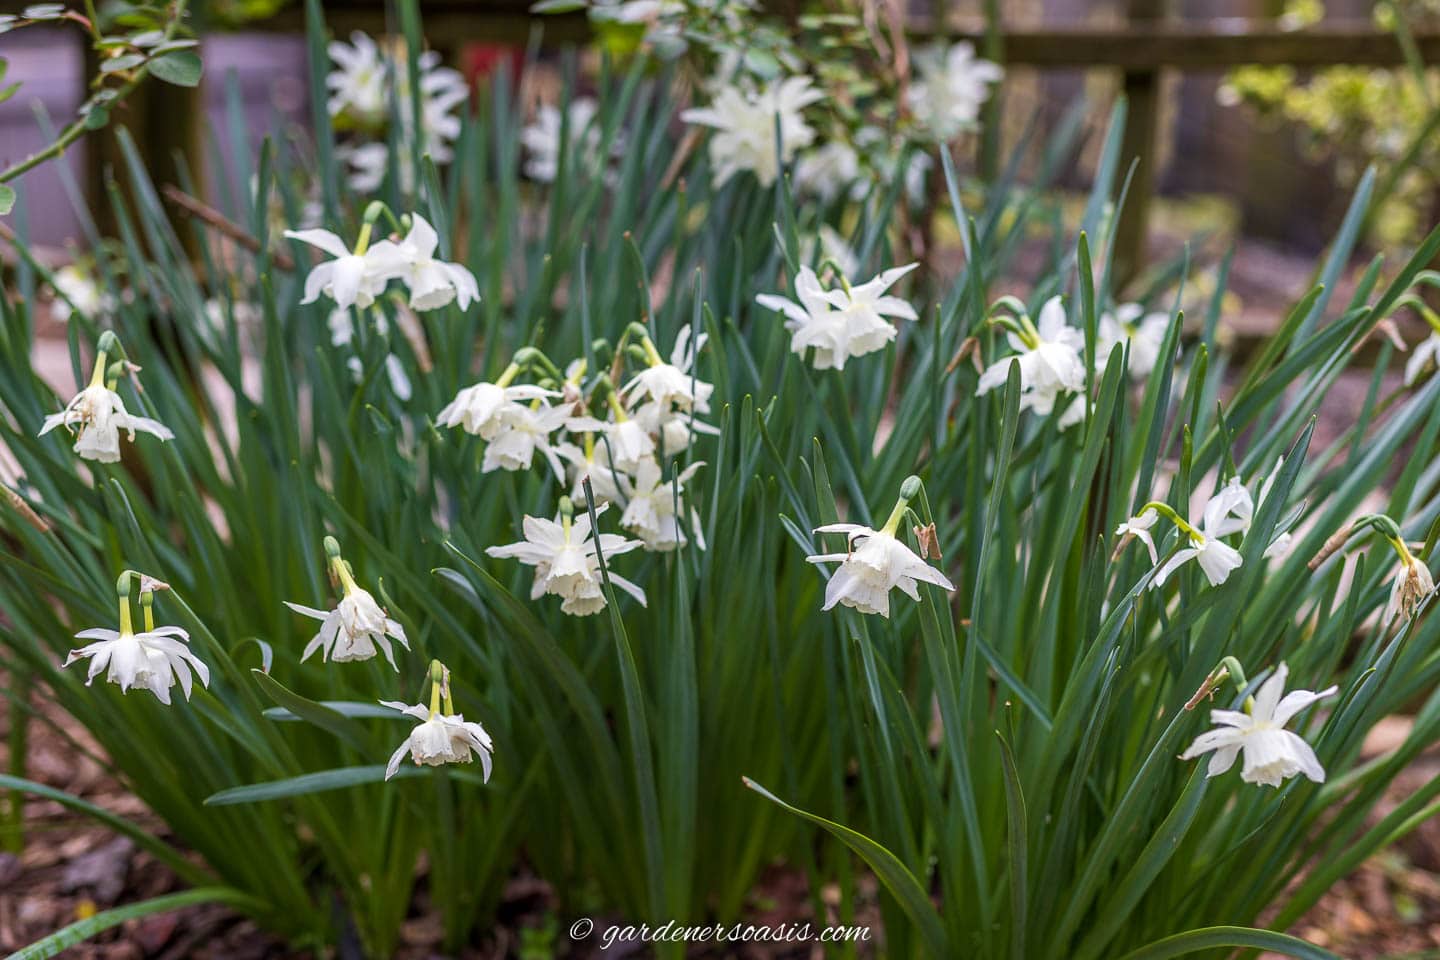 White daffodils blooming in the early spring